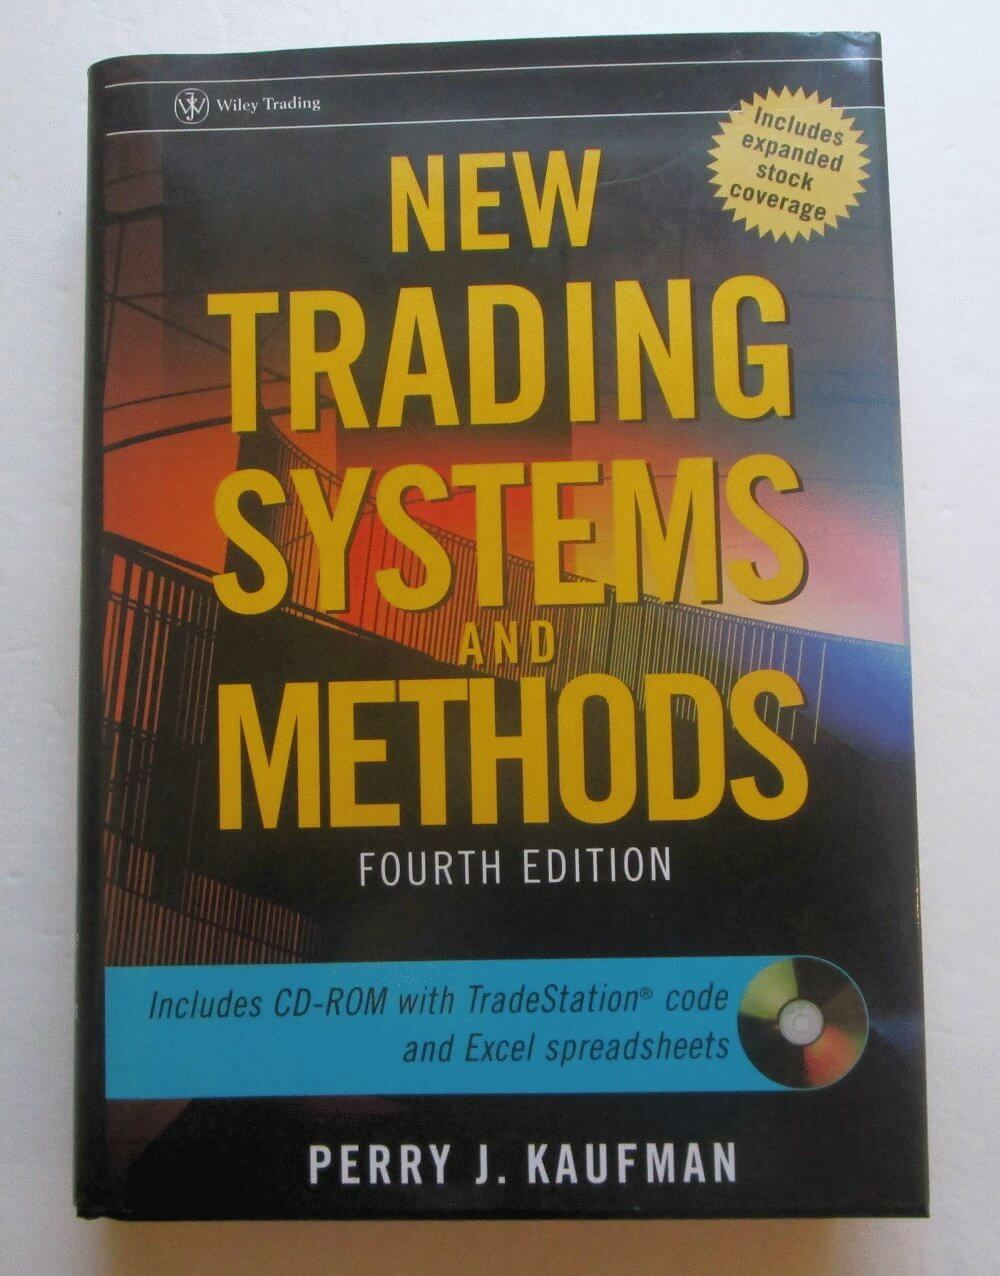 New Trading Systems and Methods (Wiley Trading)